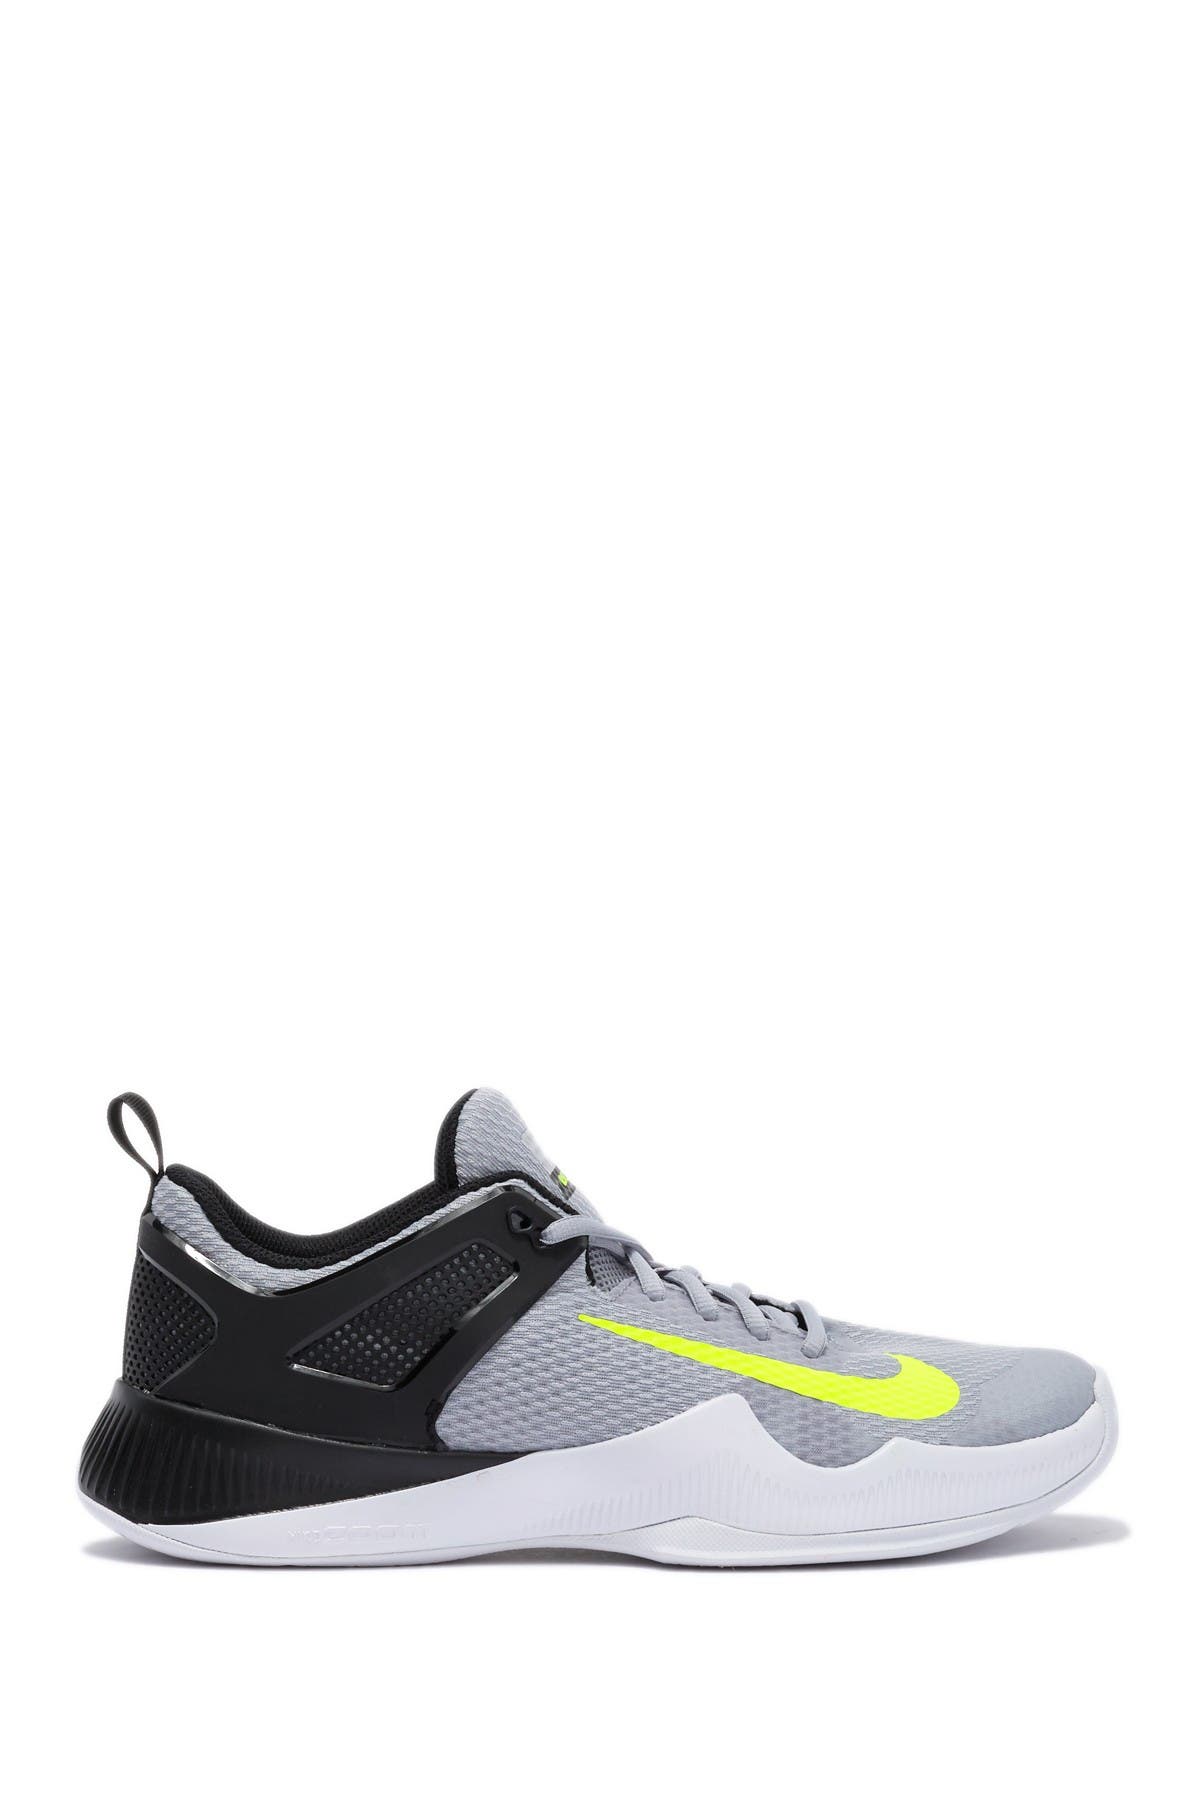 men's nike hyperattack volleyball shoes